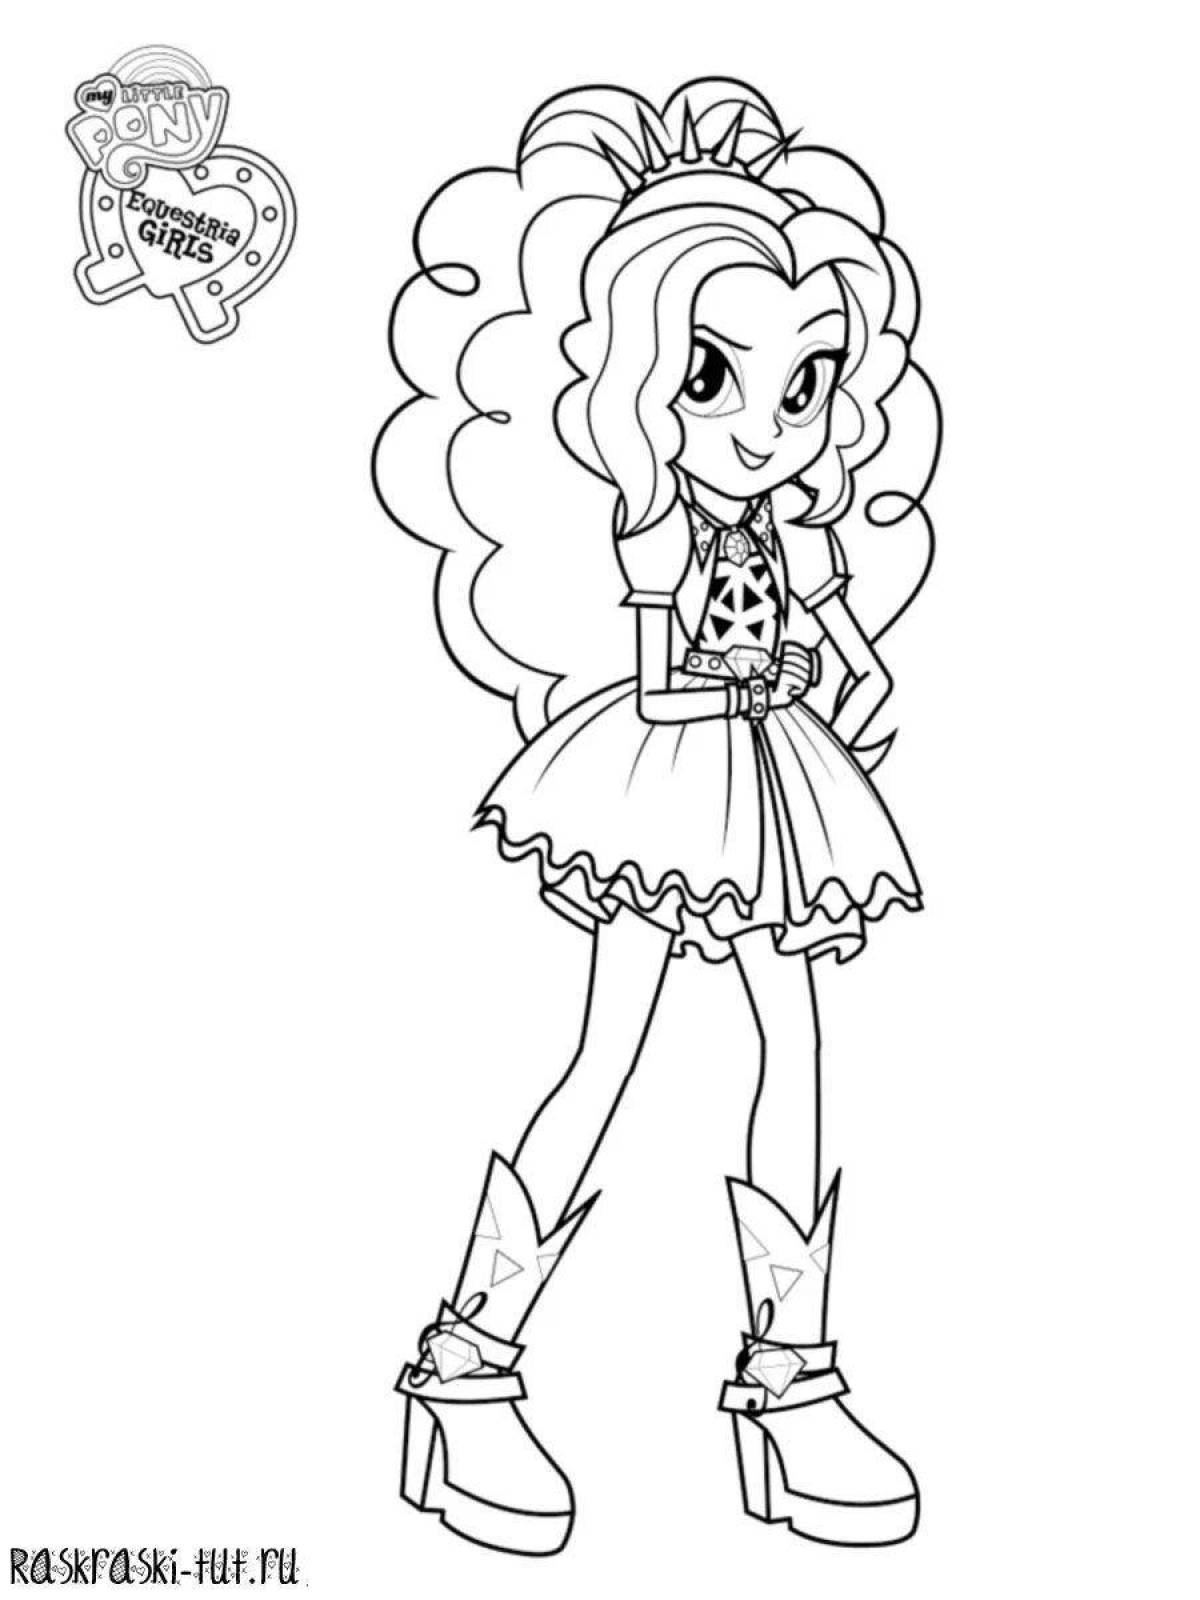 Fun coloring pages for girls from equestria